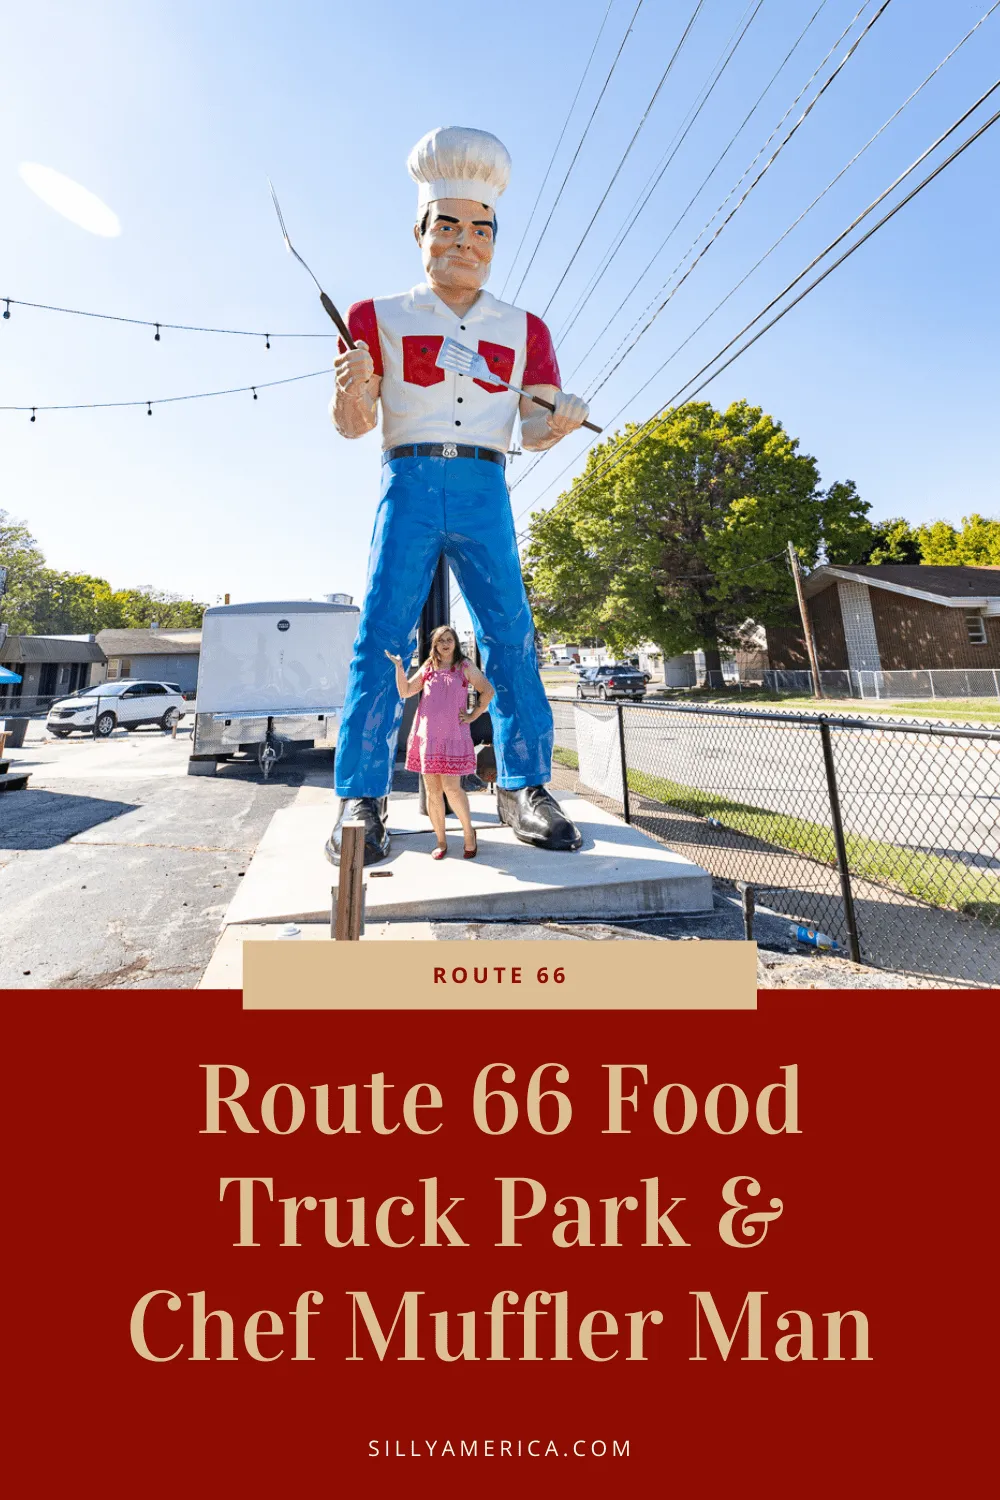 The Route 66 Food Truck Park opened in February, 2020 and features food trucks with a variety of different cuisines, a full-service bar, and a giant muffler man out front. Visit this Springfield, Missouri food truck park on a Route 66 road trip and see this fun roadside attraction.  #RoadTrips #RoadTripStop  #Route66 #Route66RoadTrip #MissouriRoute66 #Missouri #MissouriRoadTrip #MissouriRoadsideAttractions #Missouri #RoadsideAttractions #RoadsideAttraction #RoadsideAmerica #RoadTrip